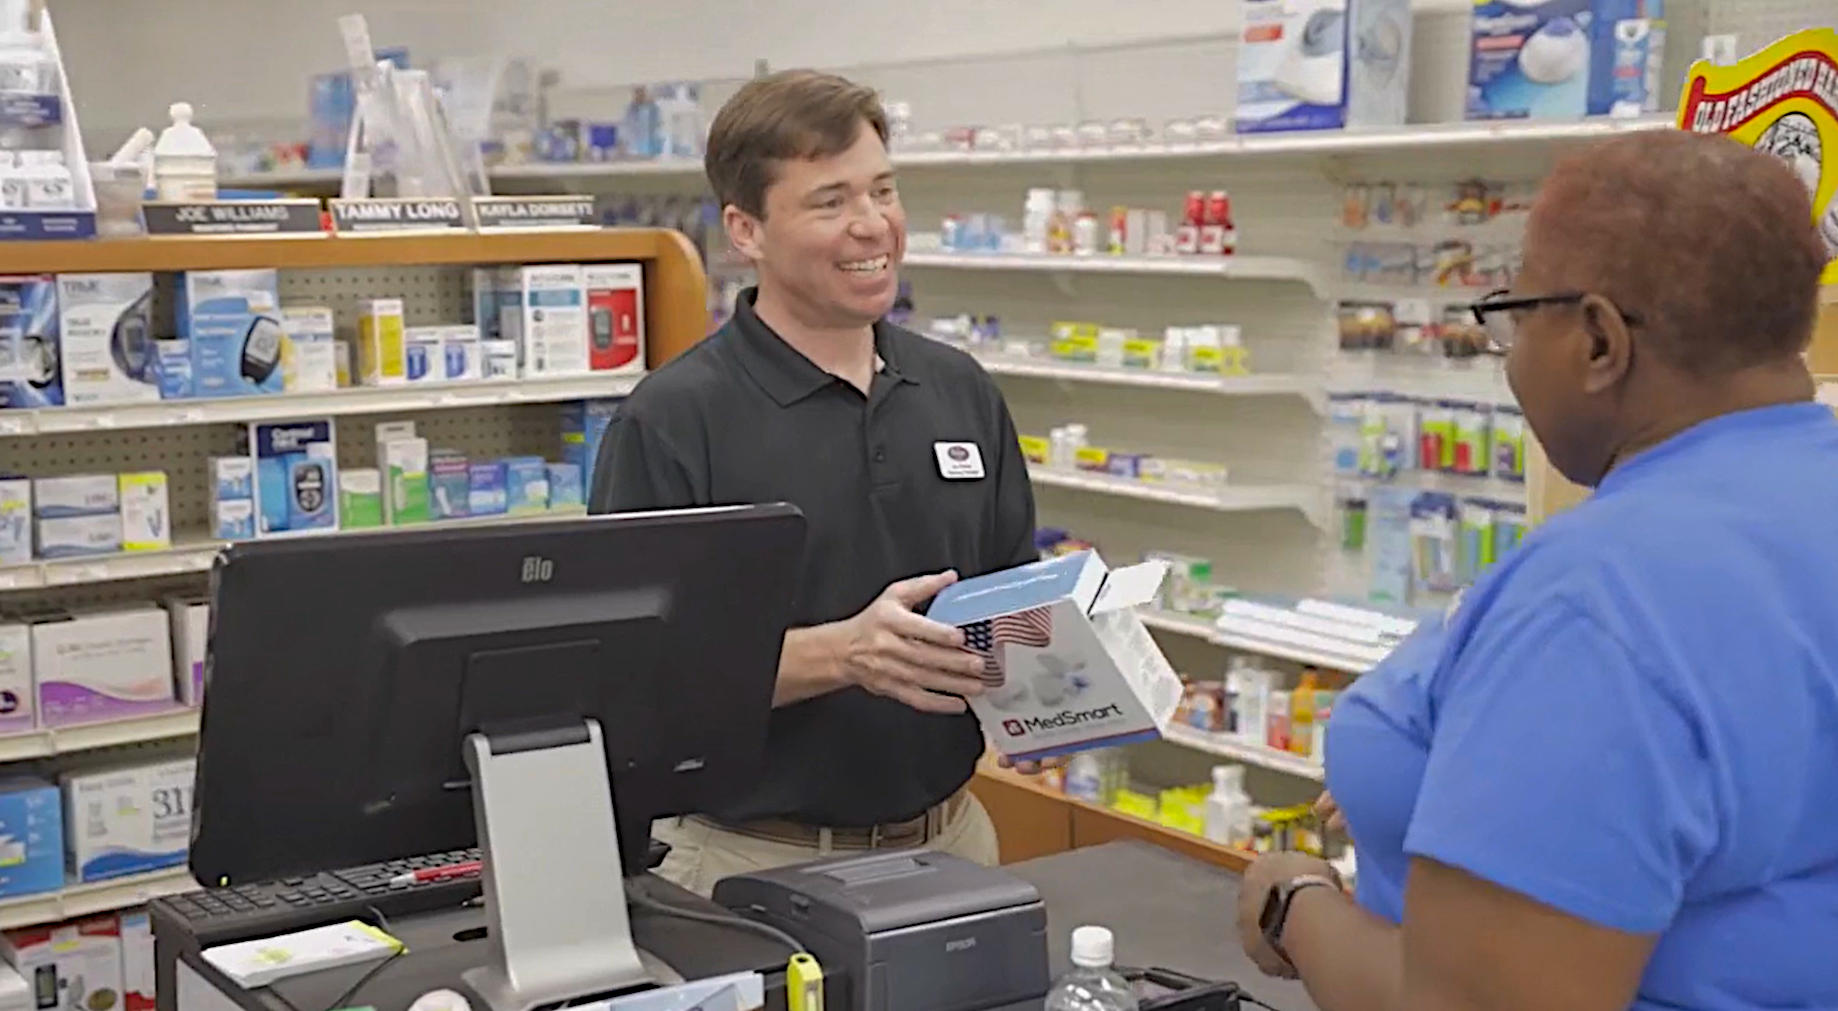 Smiling pharmacist and customer discussing a product in the pharmacy